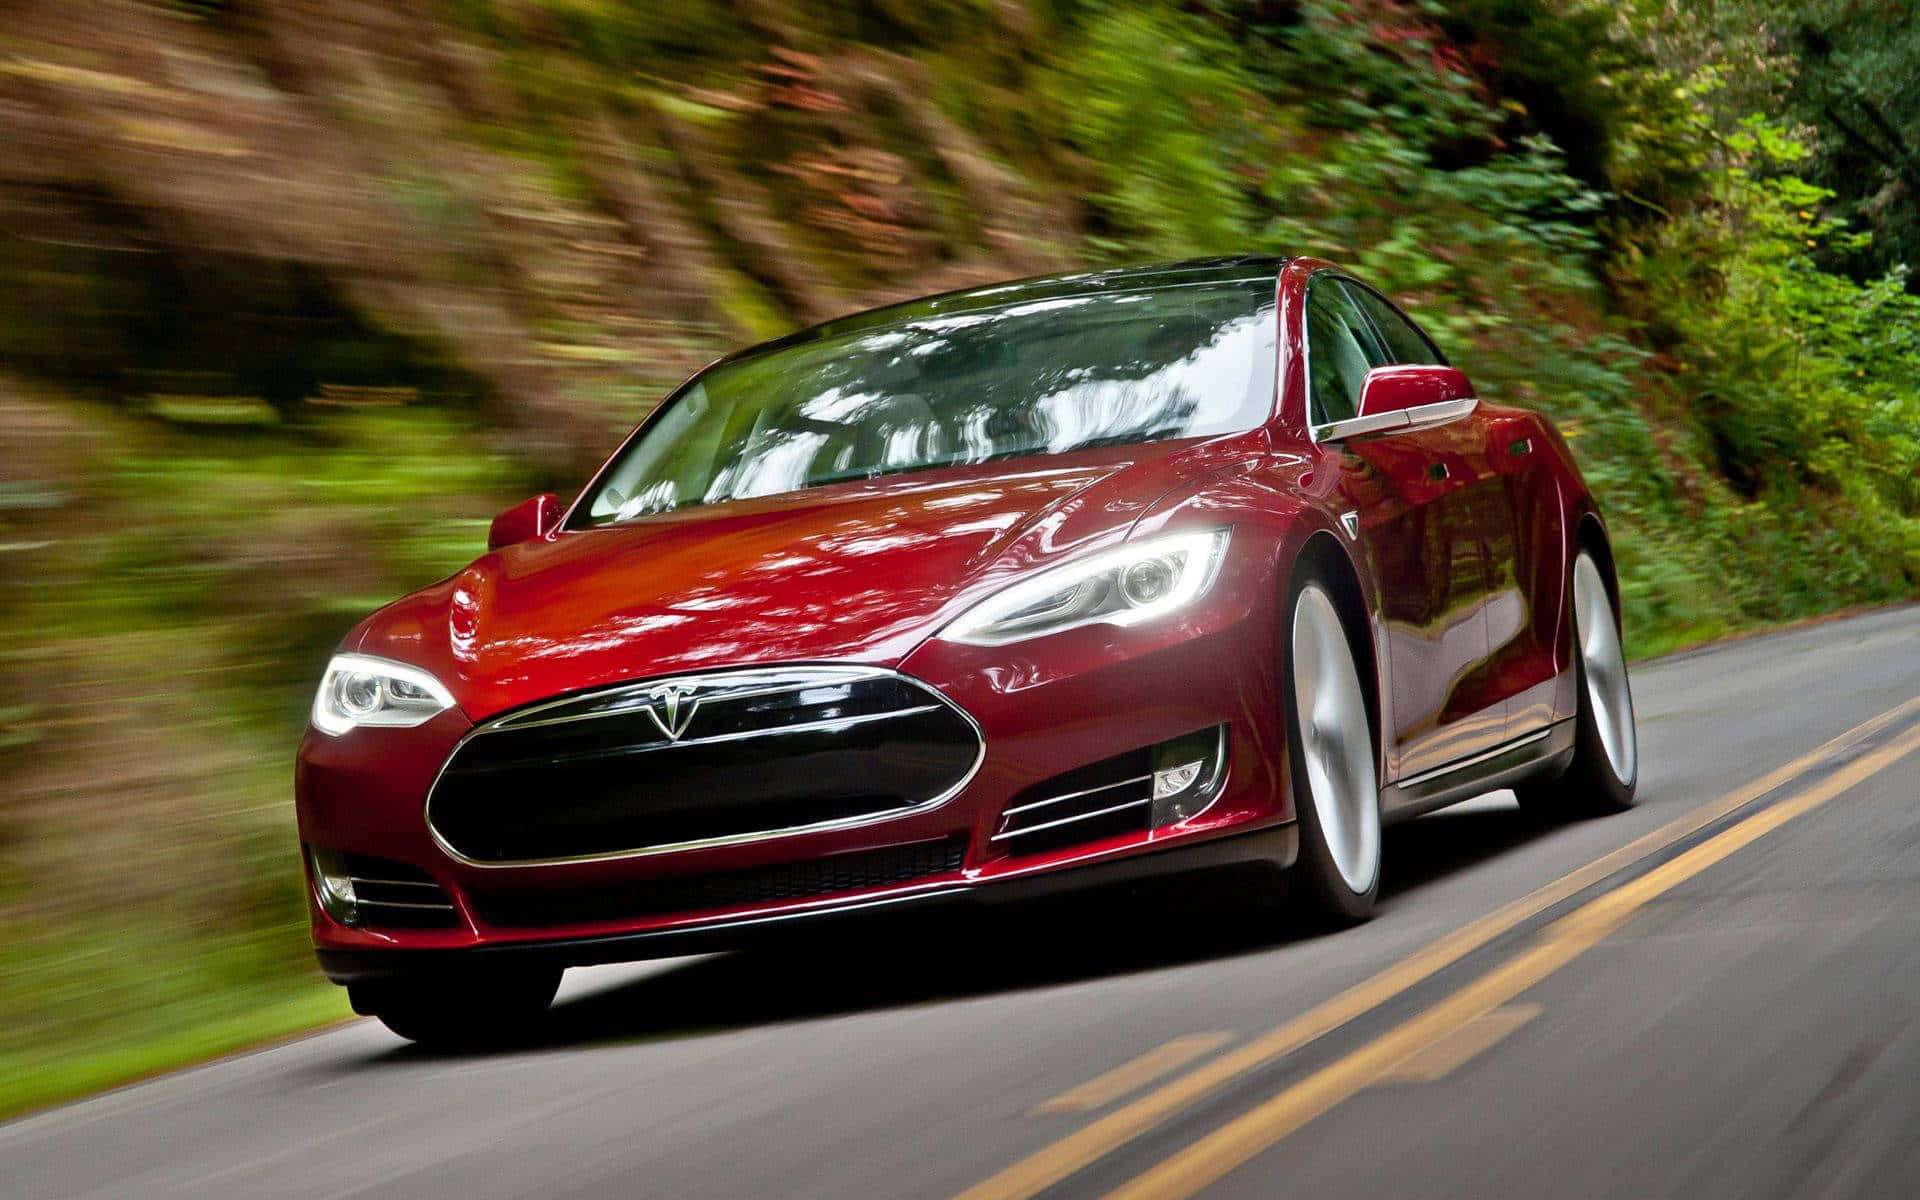 The Tesla Model S at its best